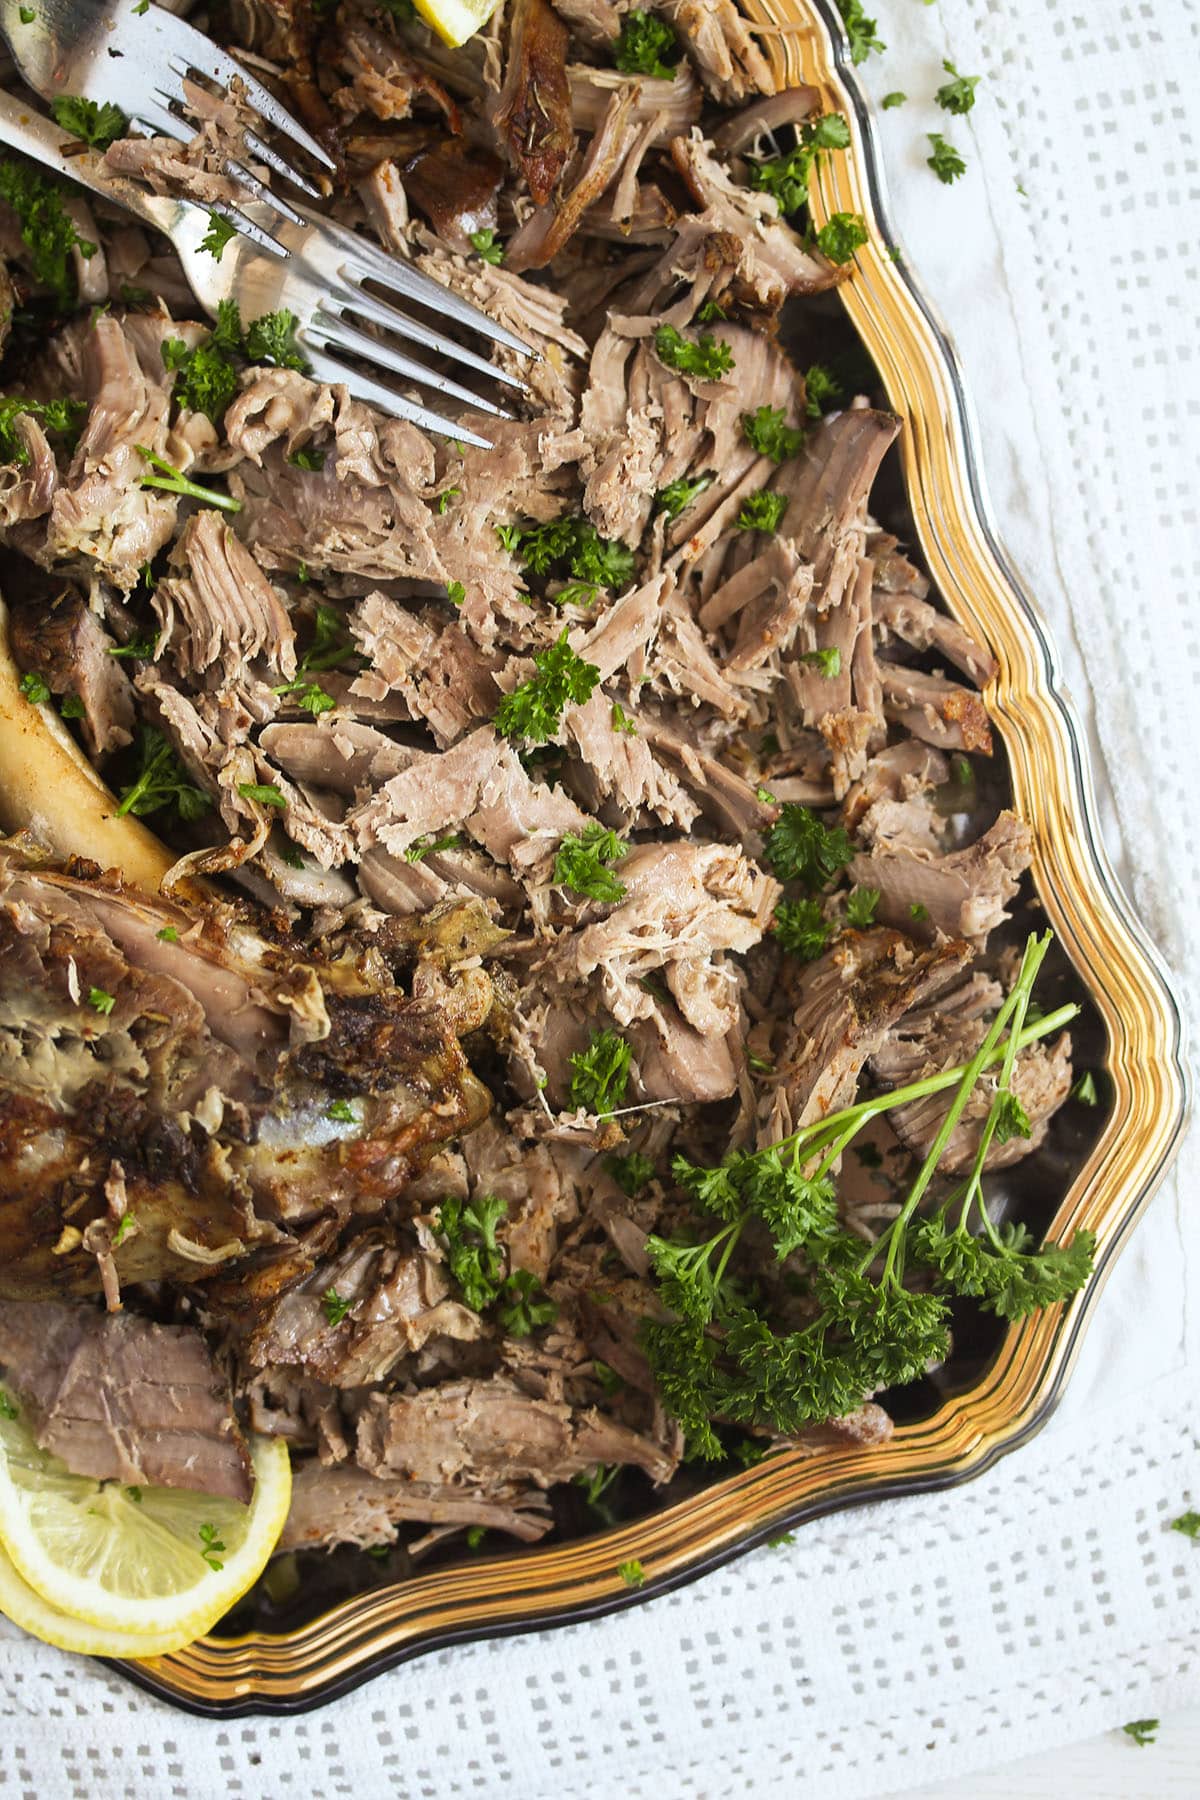 platter with pulled lamb, parsley, lemon and a fork.